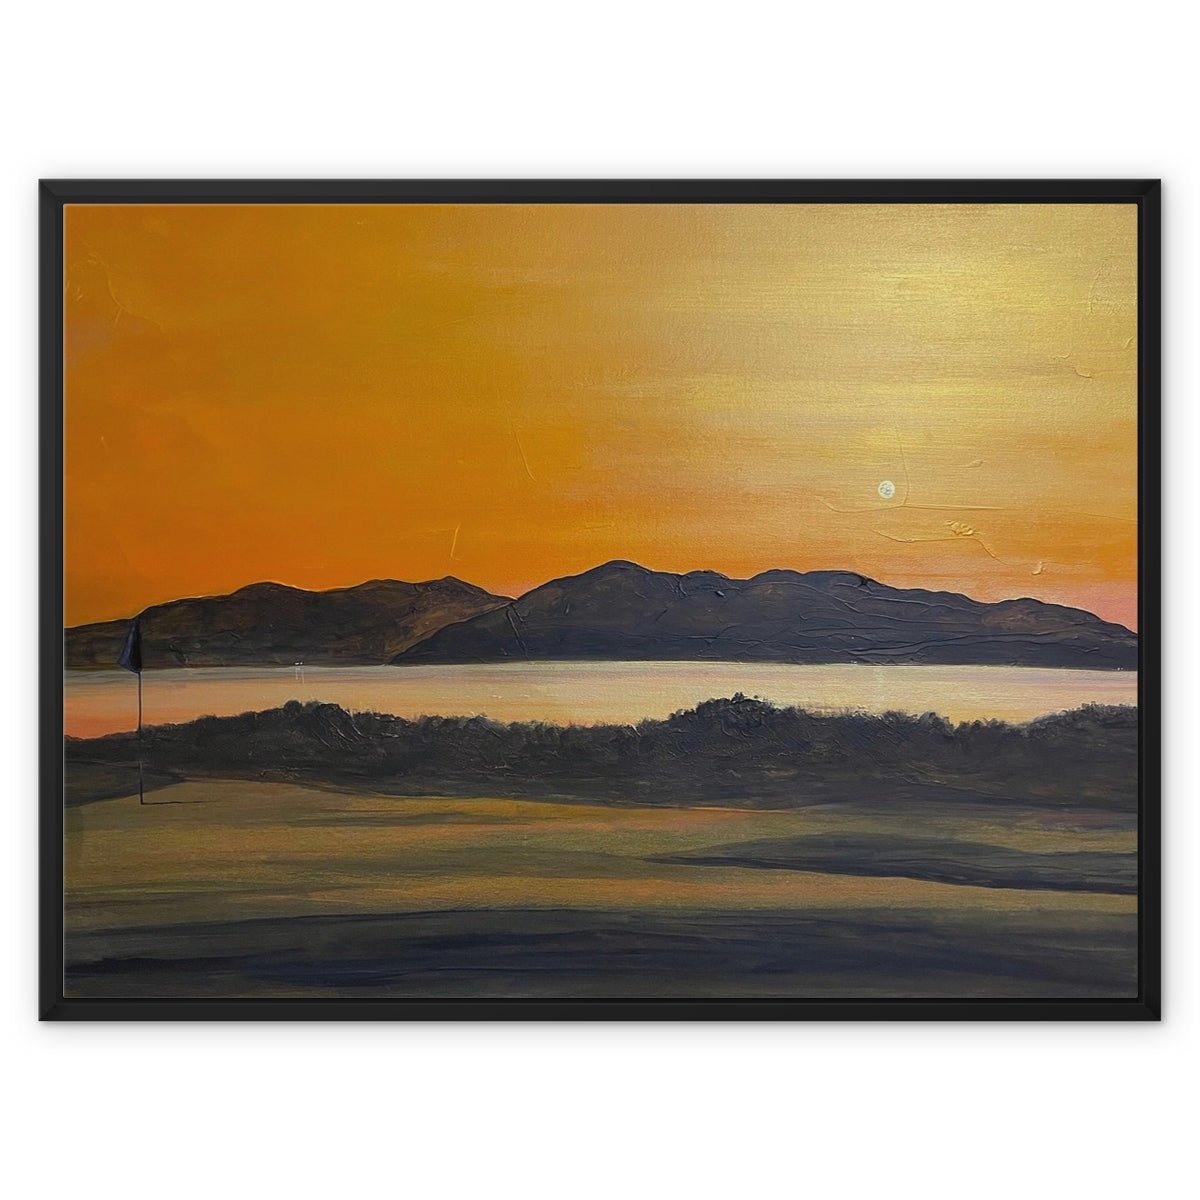 Arran & The 5th Green Royal Troon Golf Course Painting | Framed Canvas-Floating Framed Canvas Prints-Arran Art Gallery-32"x24"-Black Frame-Paintings, Prints, Homeware, Art Gifts From Scotland By Scottish Artist Kevin Hunter